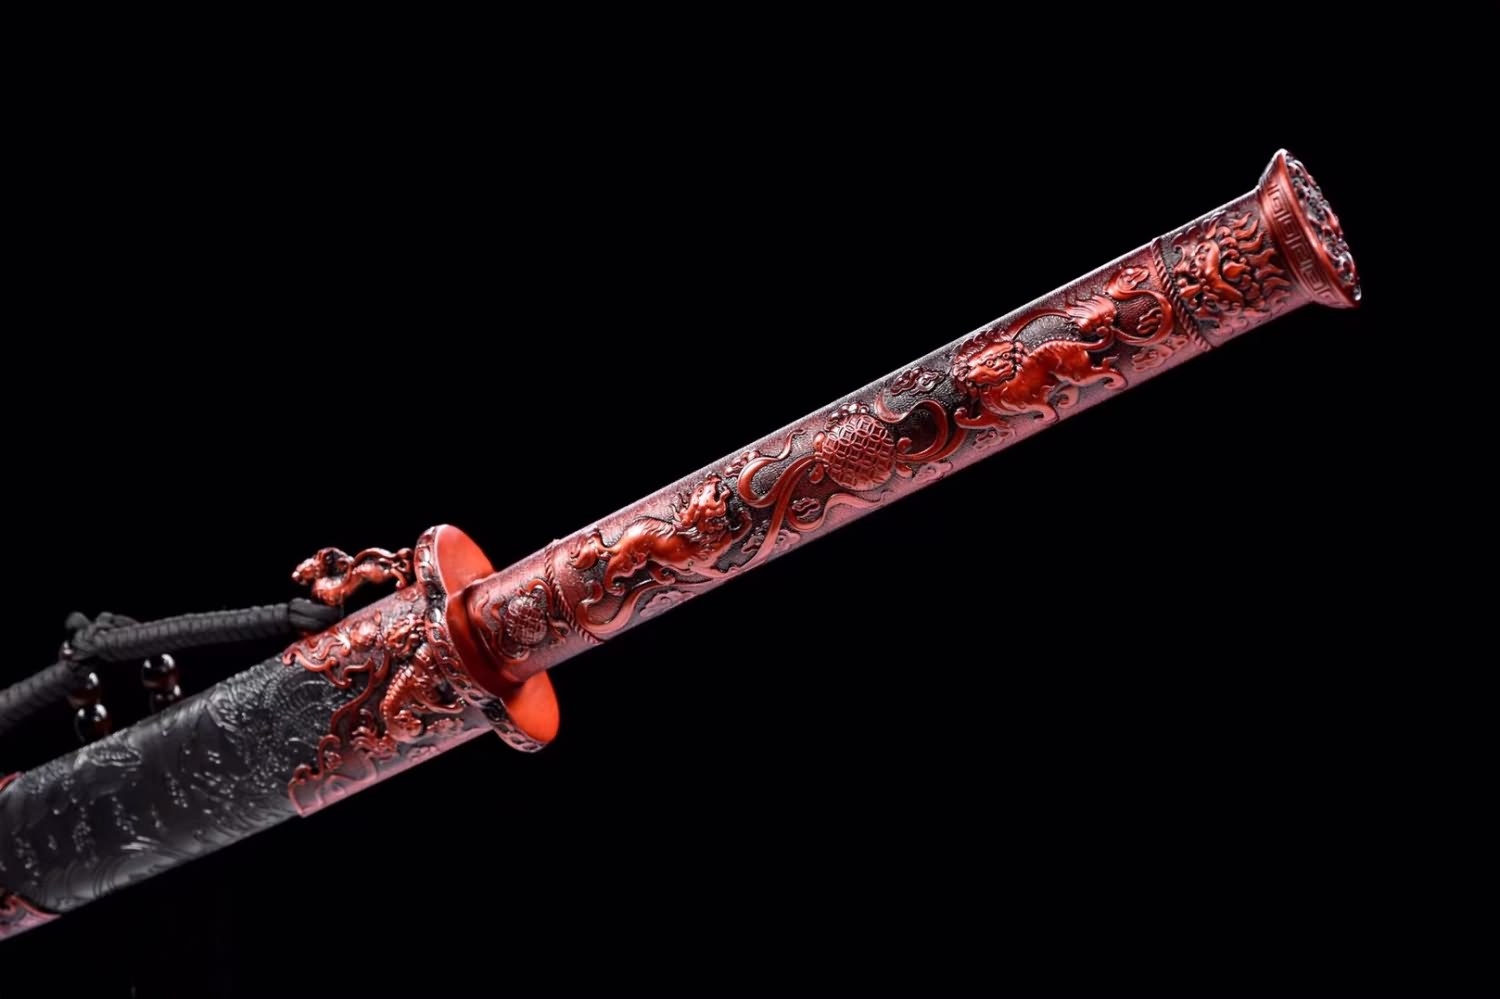 Traditional Chinese Qing Dao Sword-Spring Steel Blade, Red Alloy Fittings,Wood Wrapped Faux Leather Scabbard